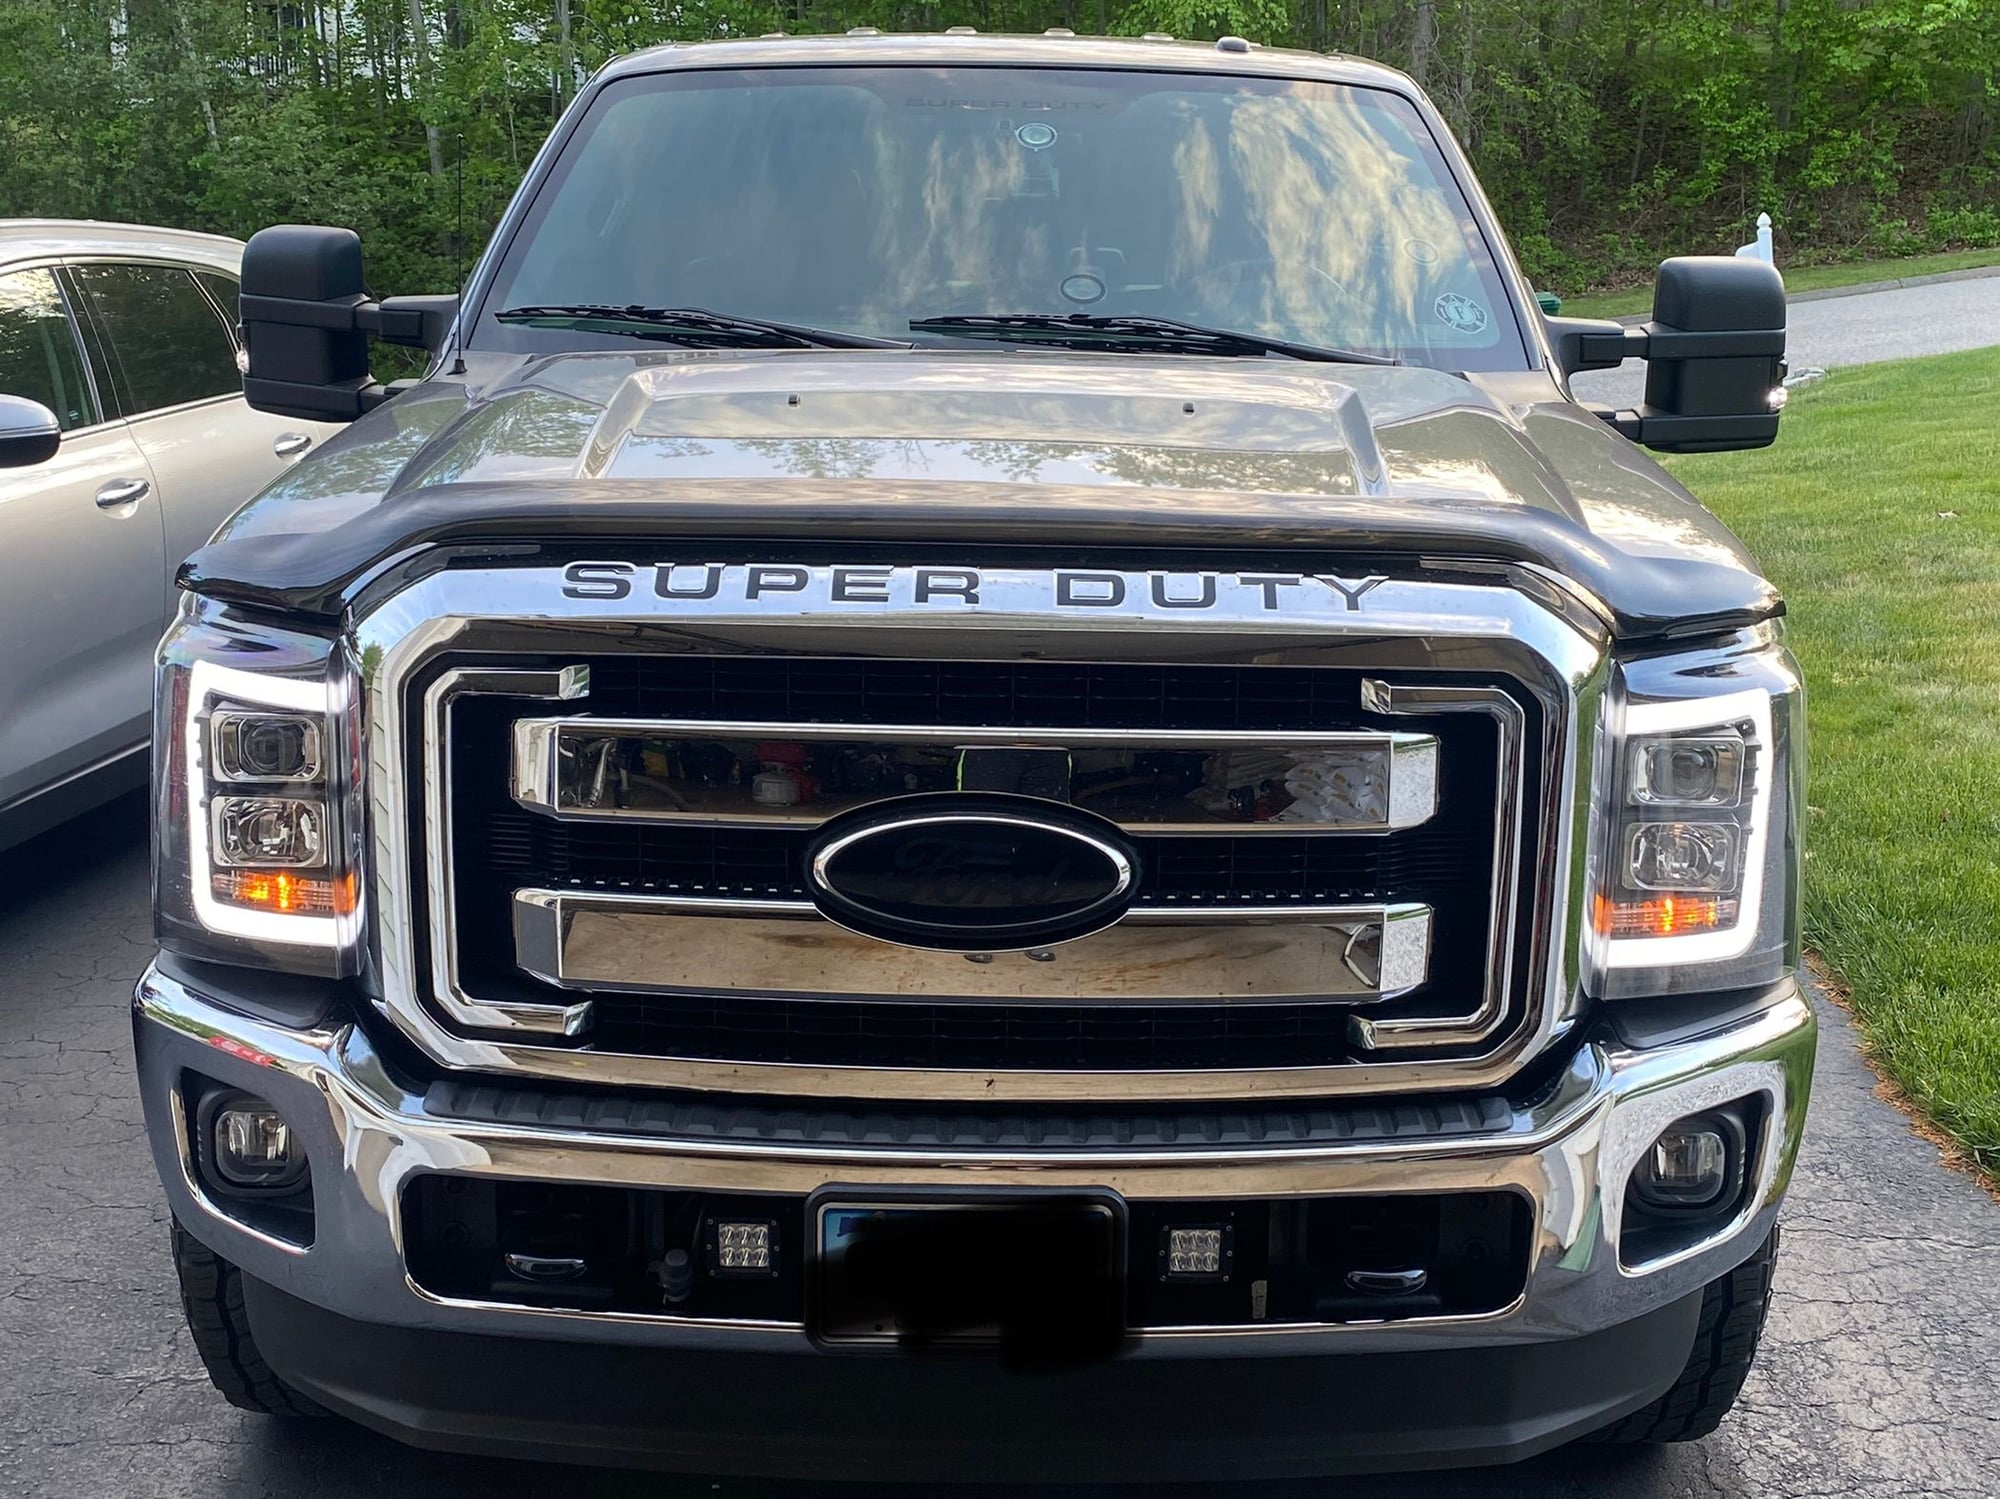 2011 Ford F-350 Super Duty - 2011 ford f350 6.7 diesel 46,000 miles - Used - VIN 1ft8w3bt5bec13865 - 8 cyl - 4WD - Automatic - Truck - Gray - East Hampton, CT 06424, United States